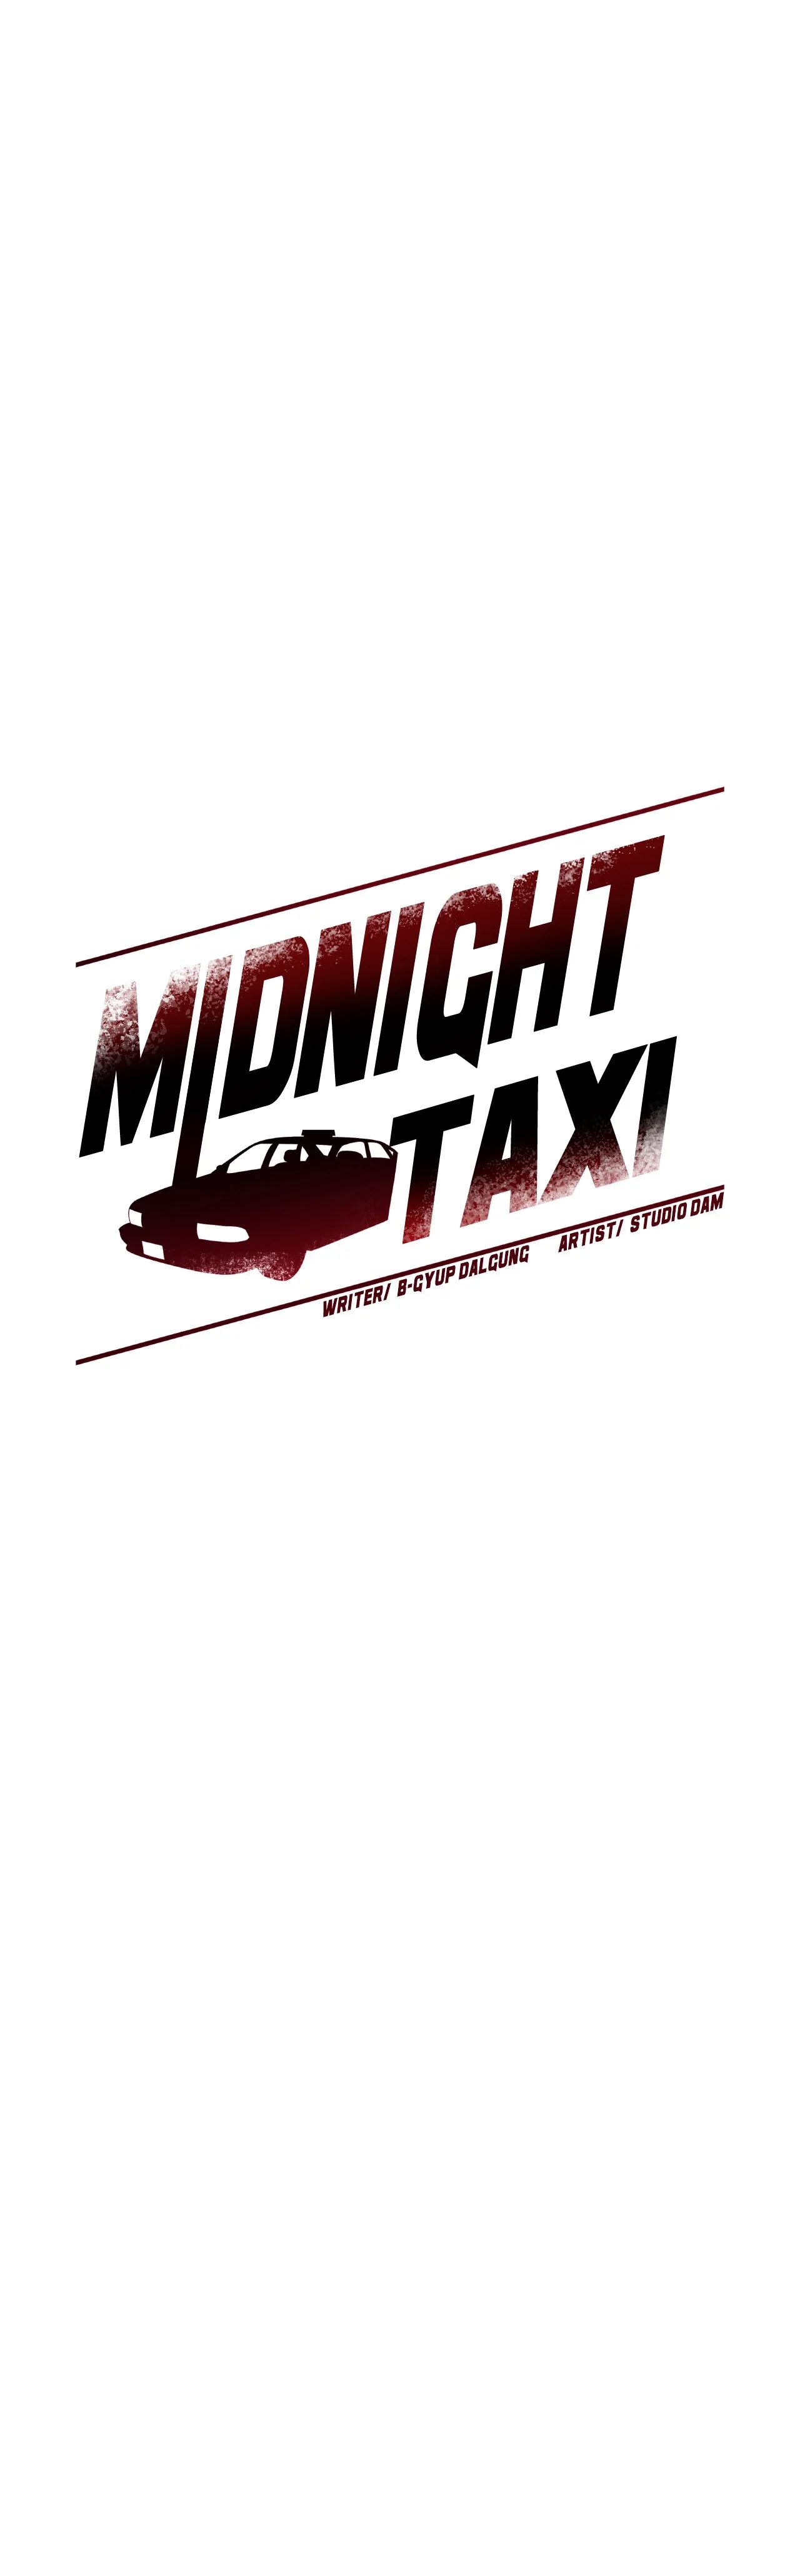 Midnight Taxi image